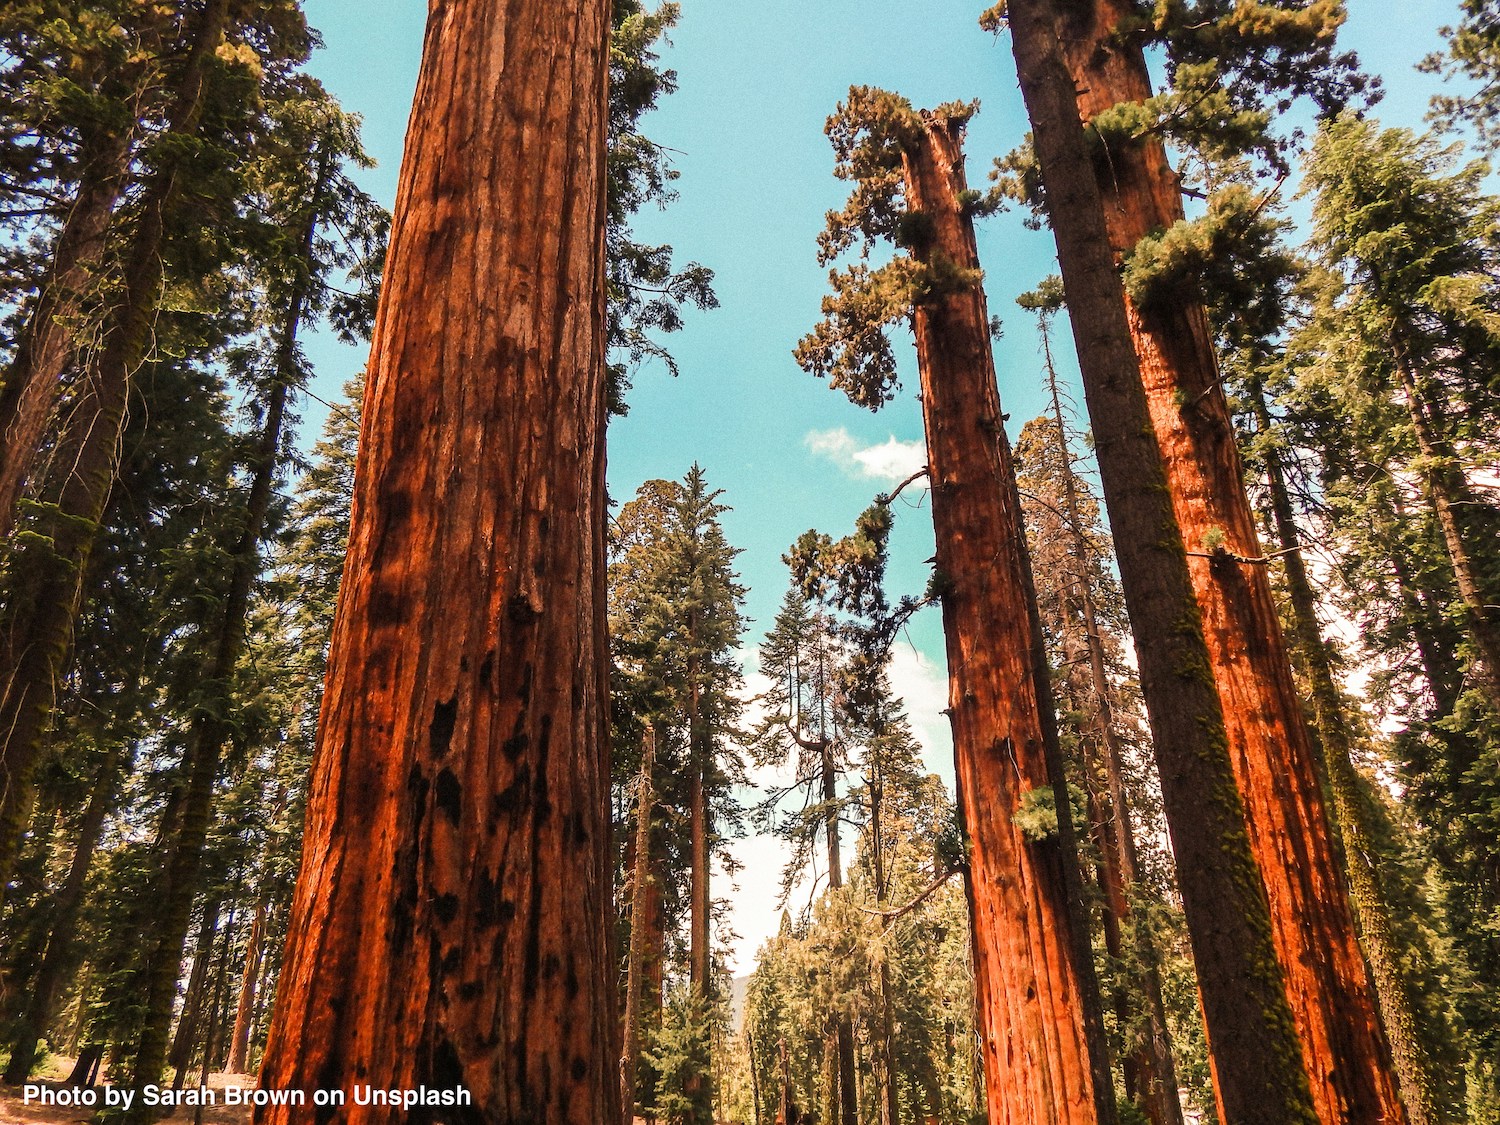 Photo of sequoia trees with a bright blue sky